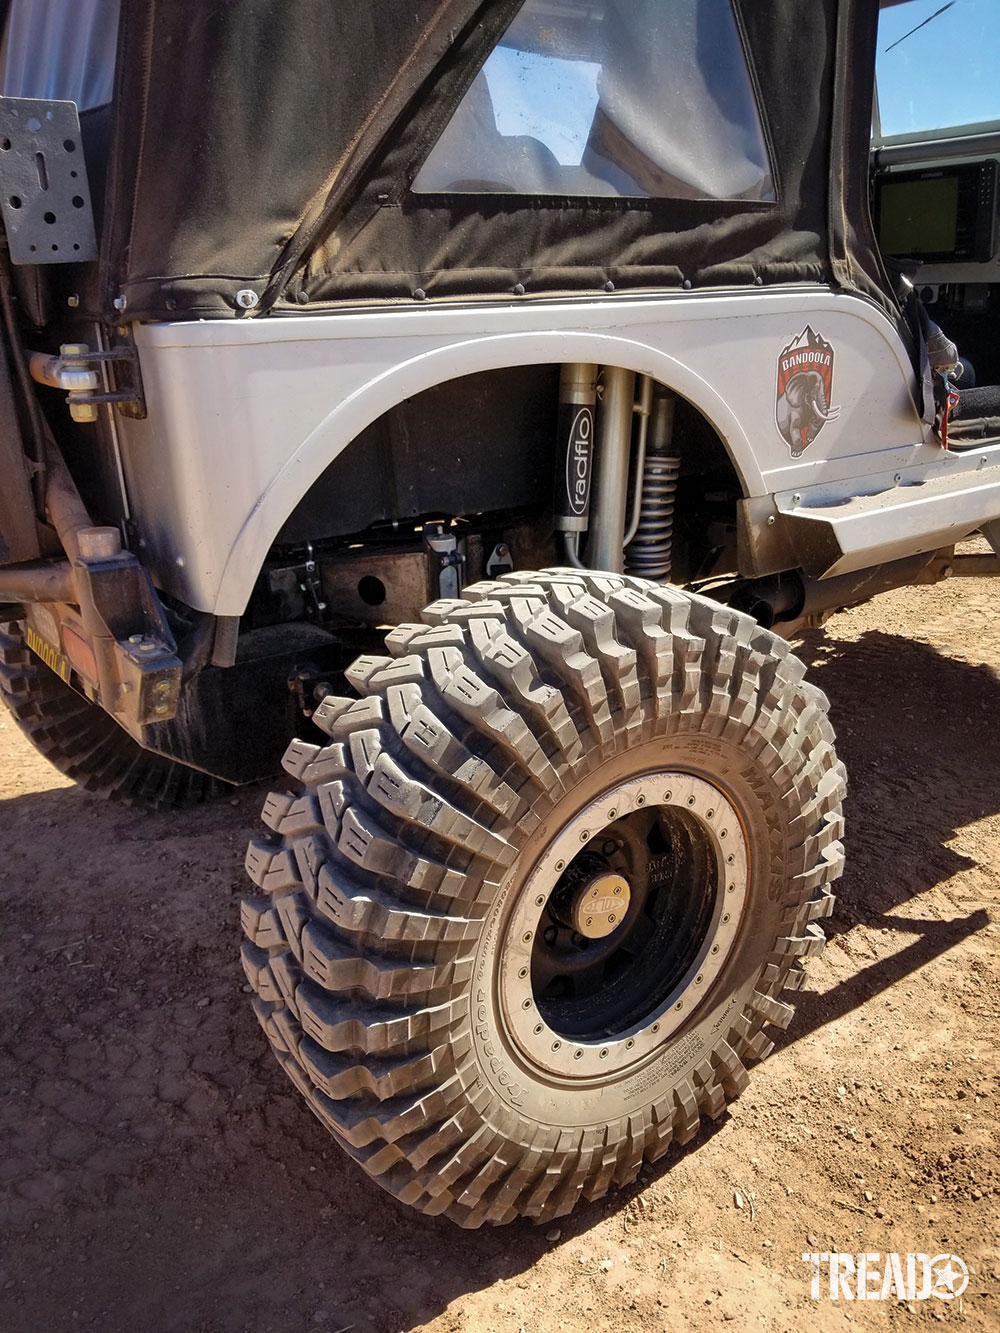 Big tires and bypass shocks help the Jeep get through all different rocky terrain.